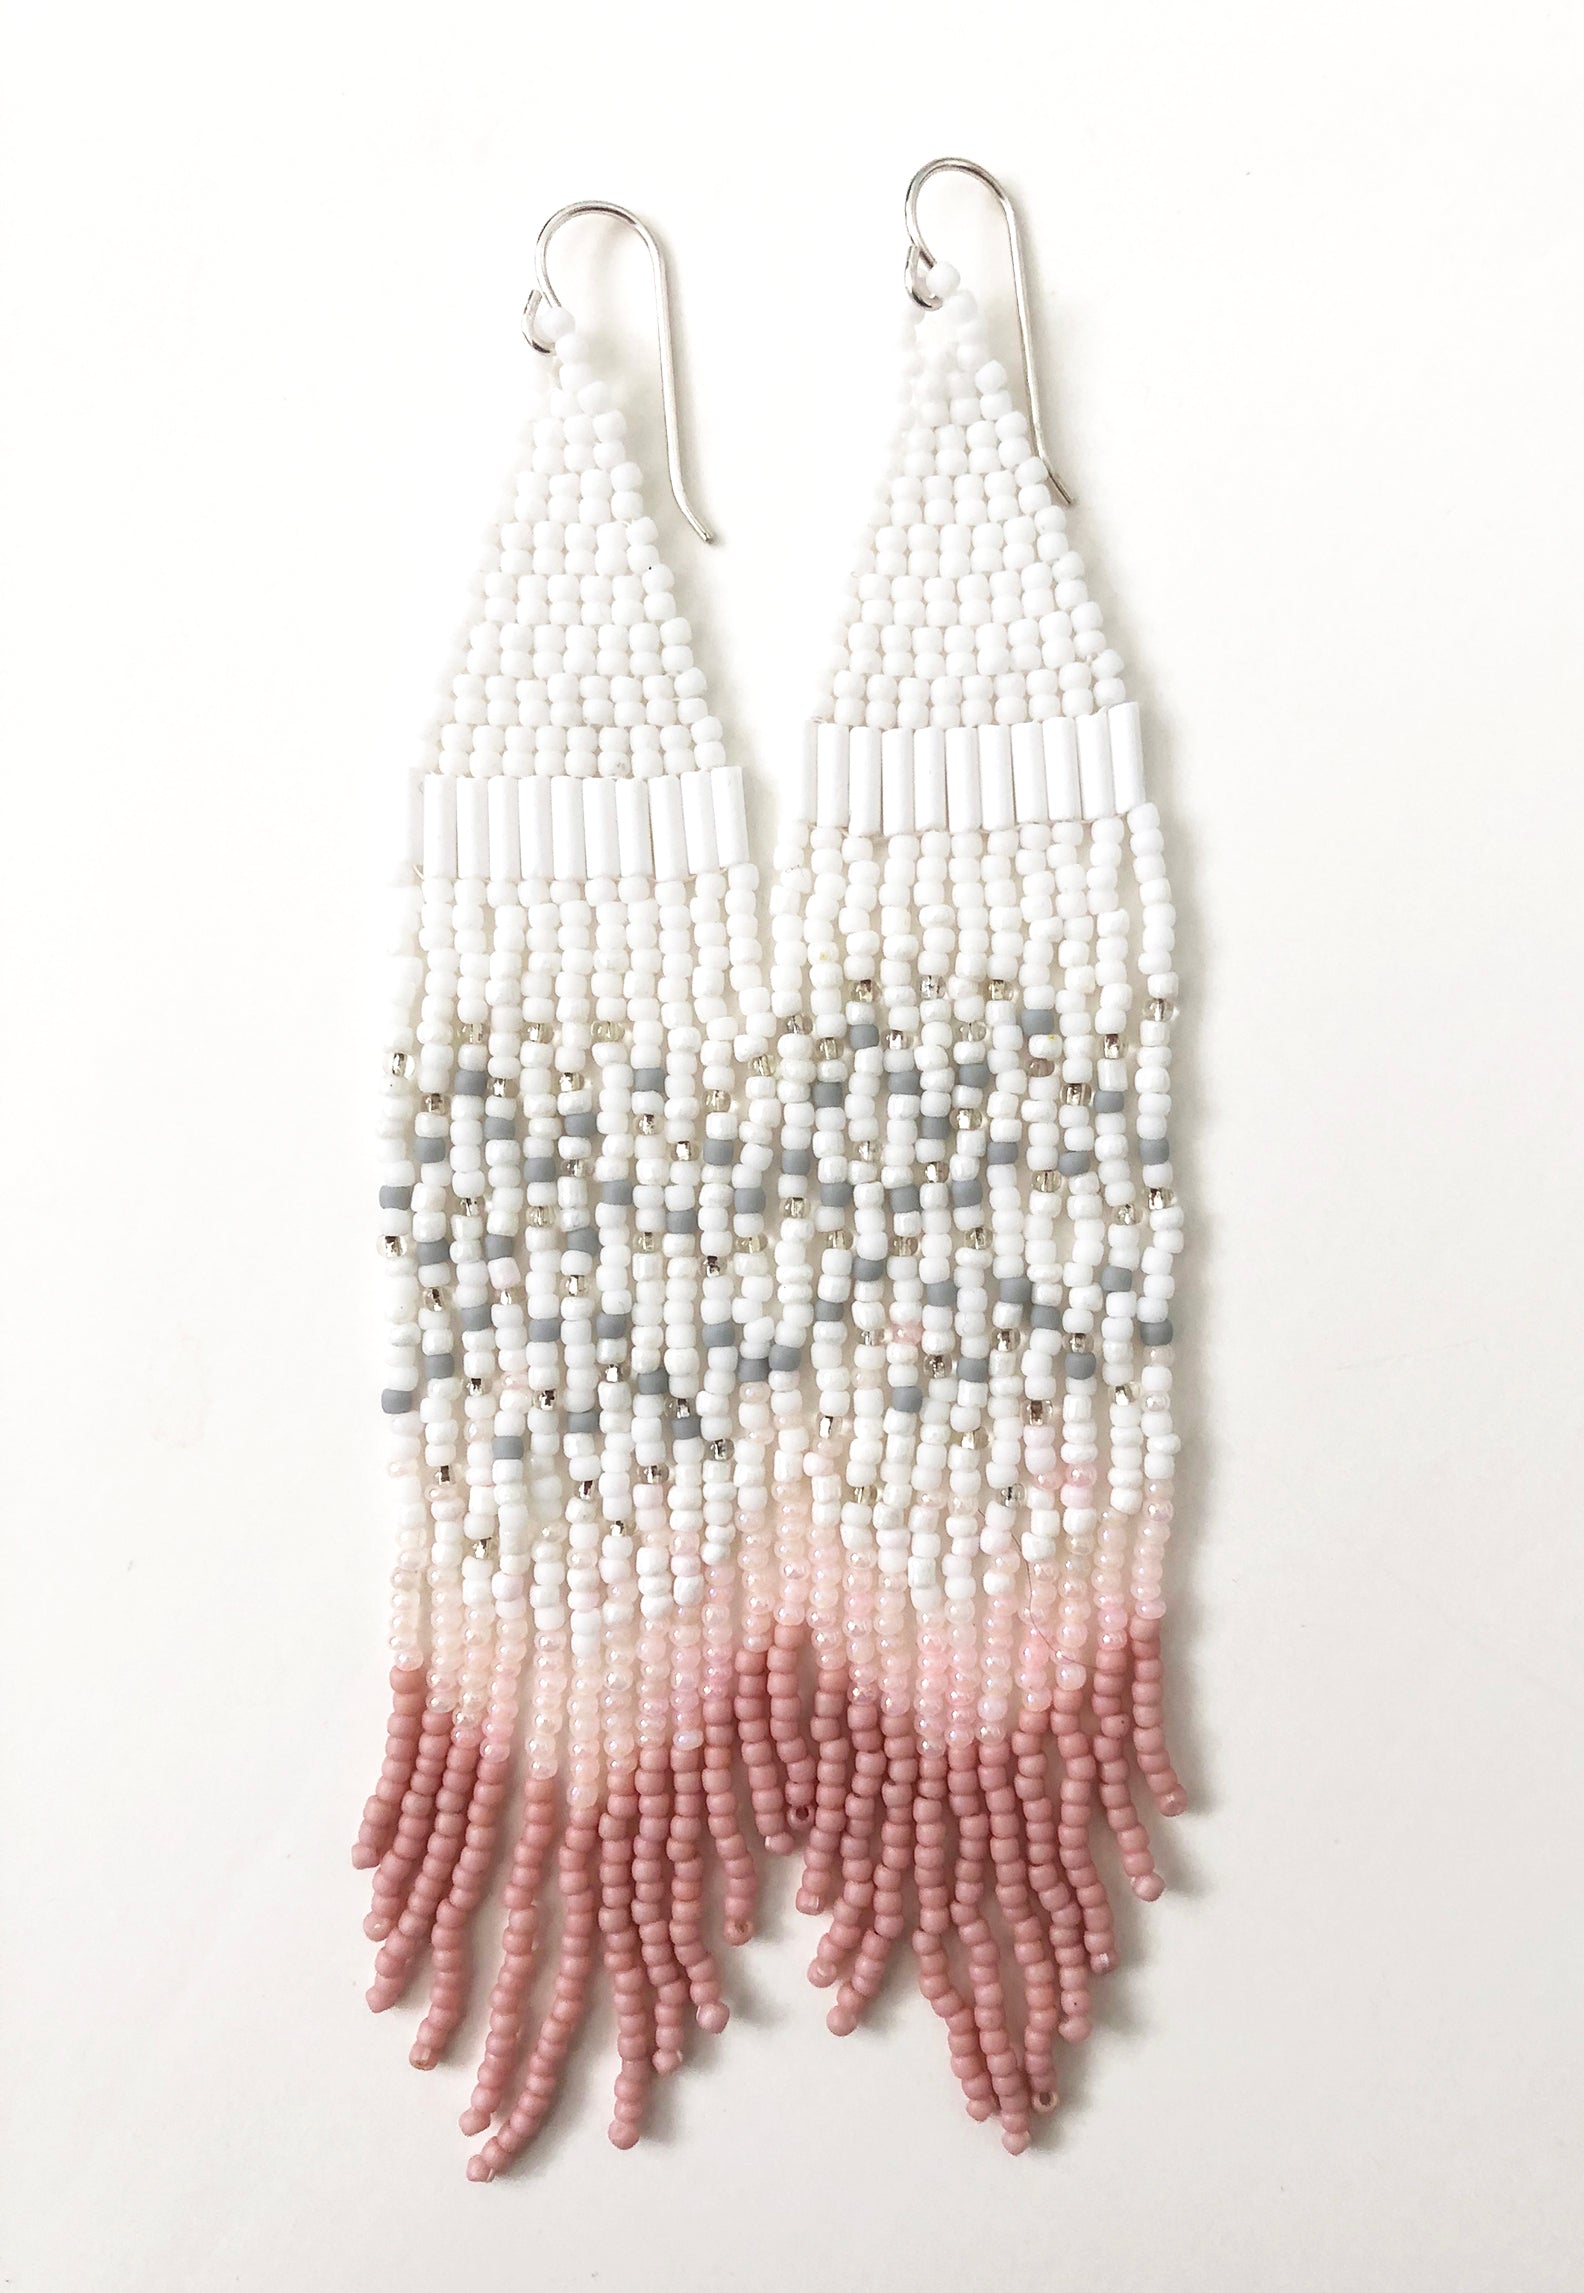 Extra long Handmade Seed Bead Fringe Earrings - blush pink, white and silver vintage beads combined with matte gray and pink